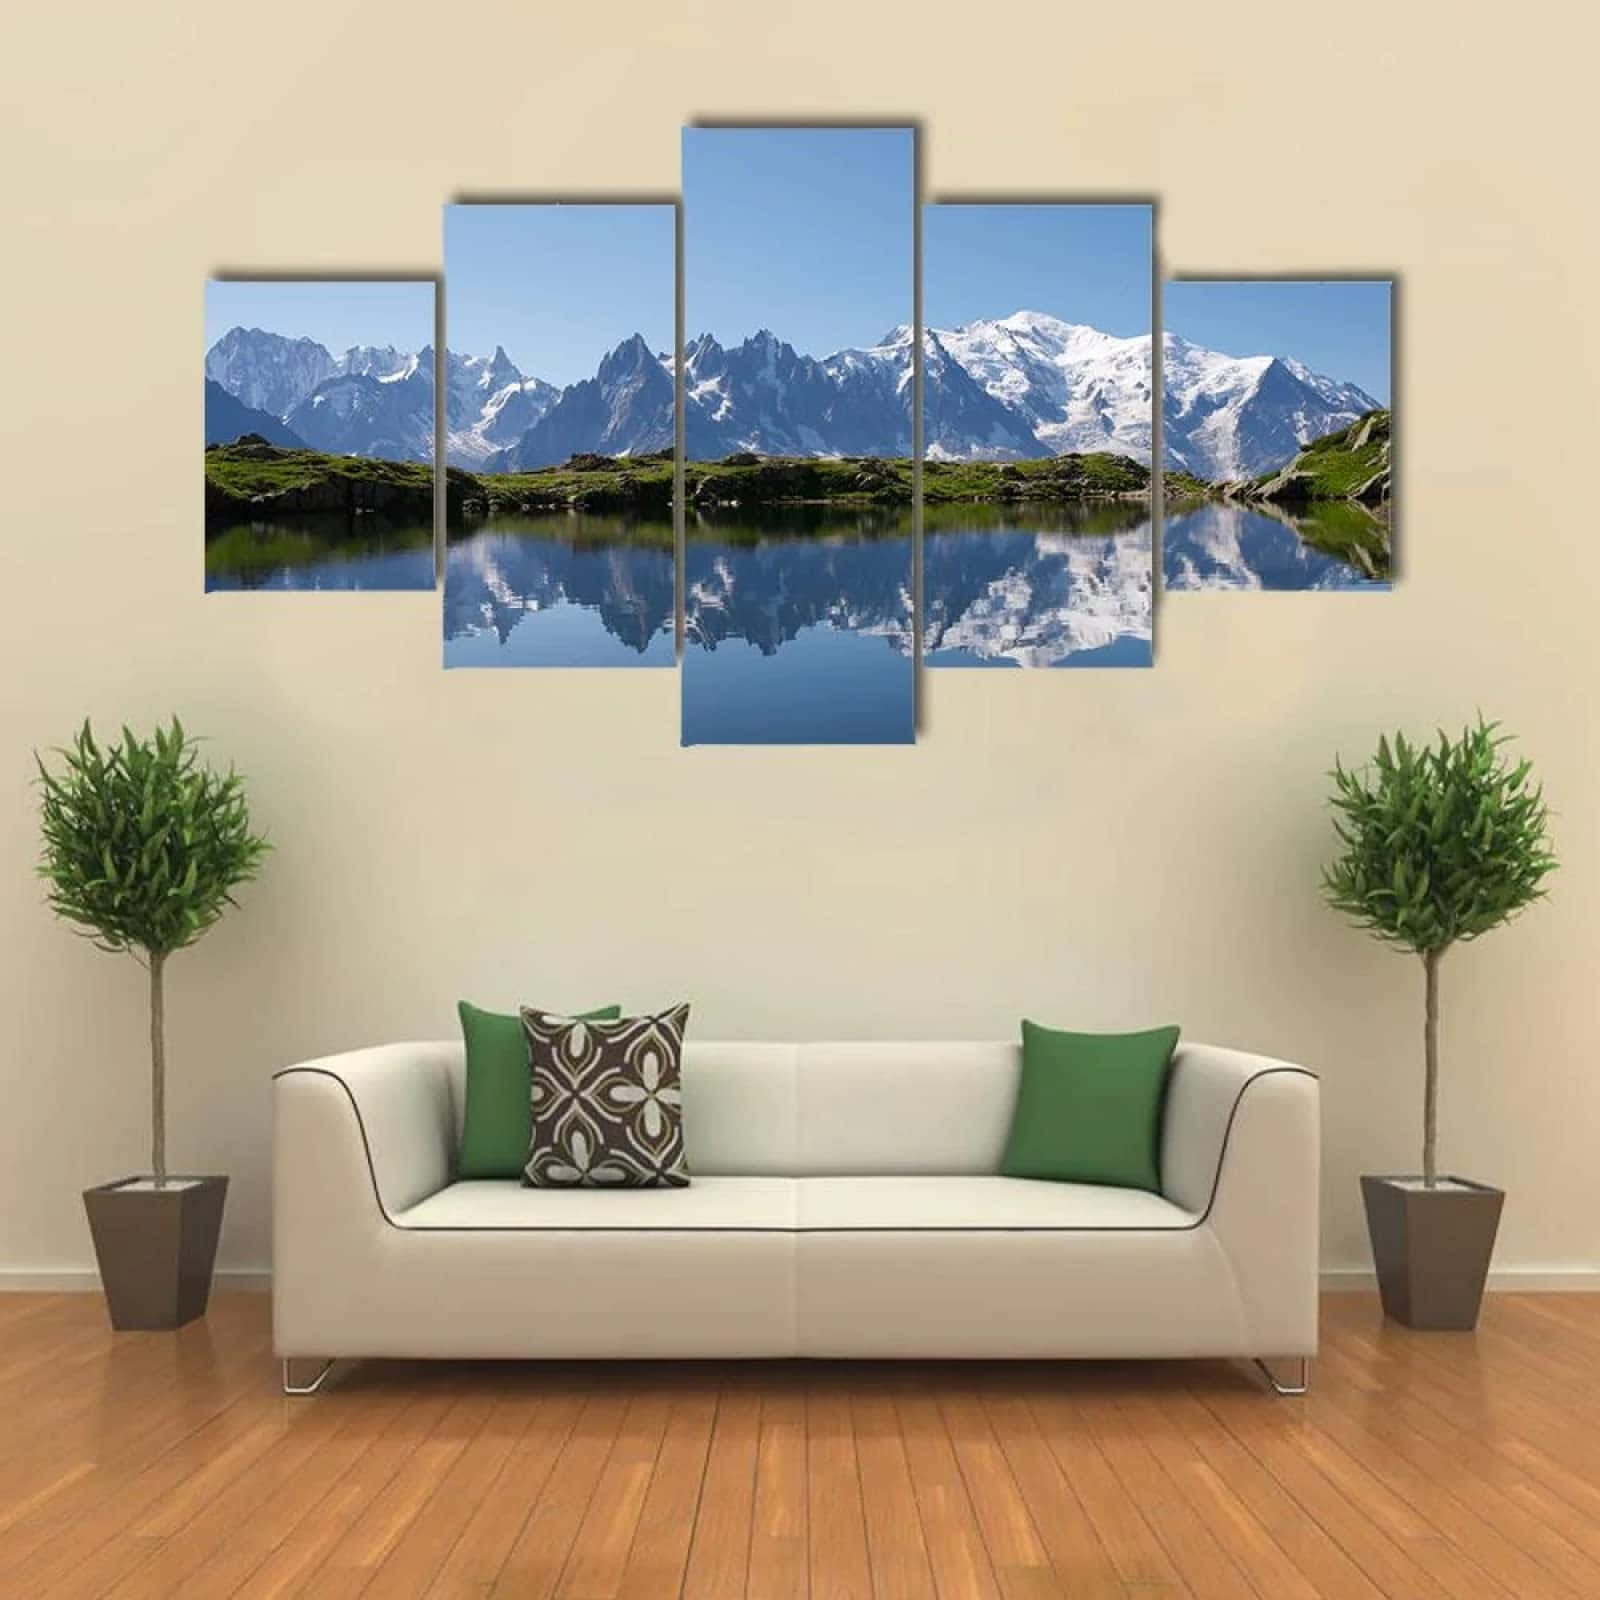 A Living Room With Mountains And Water In The Background